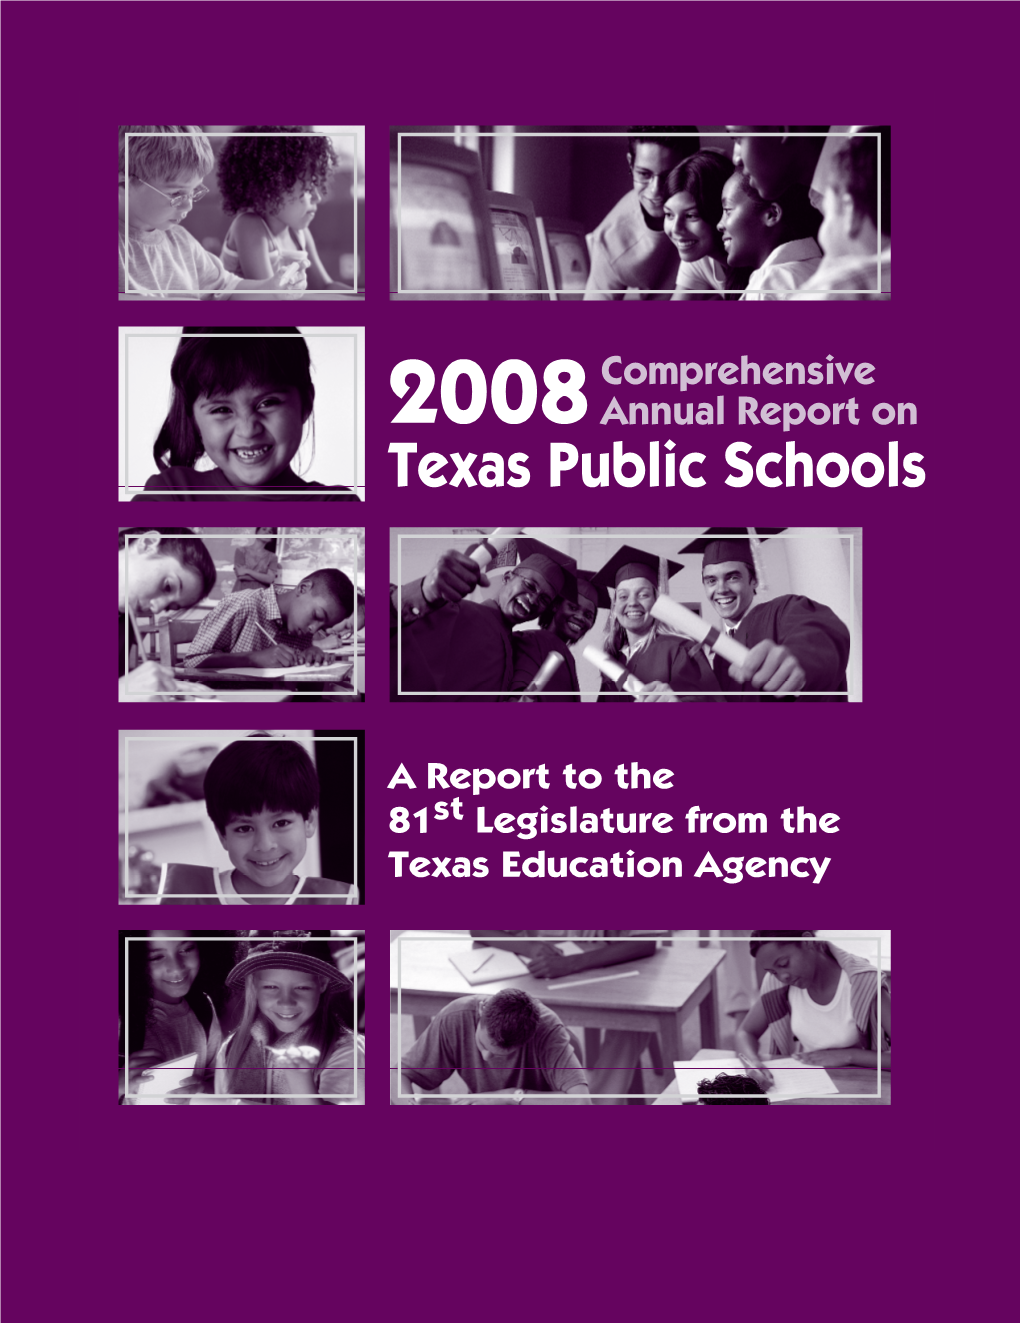 2008 Comprehensive Annual Report on Texas Public Schools Describes the Status of Texas Public Education, As Required by §39.182 of the Texas Education Code